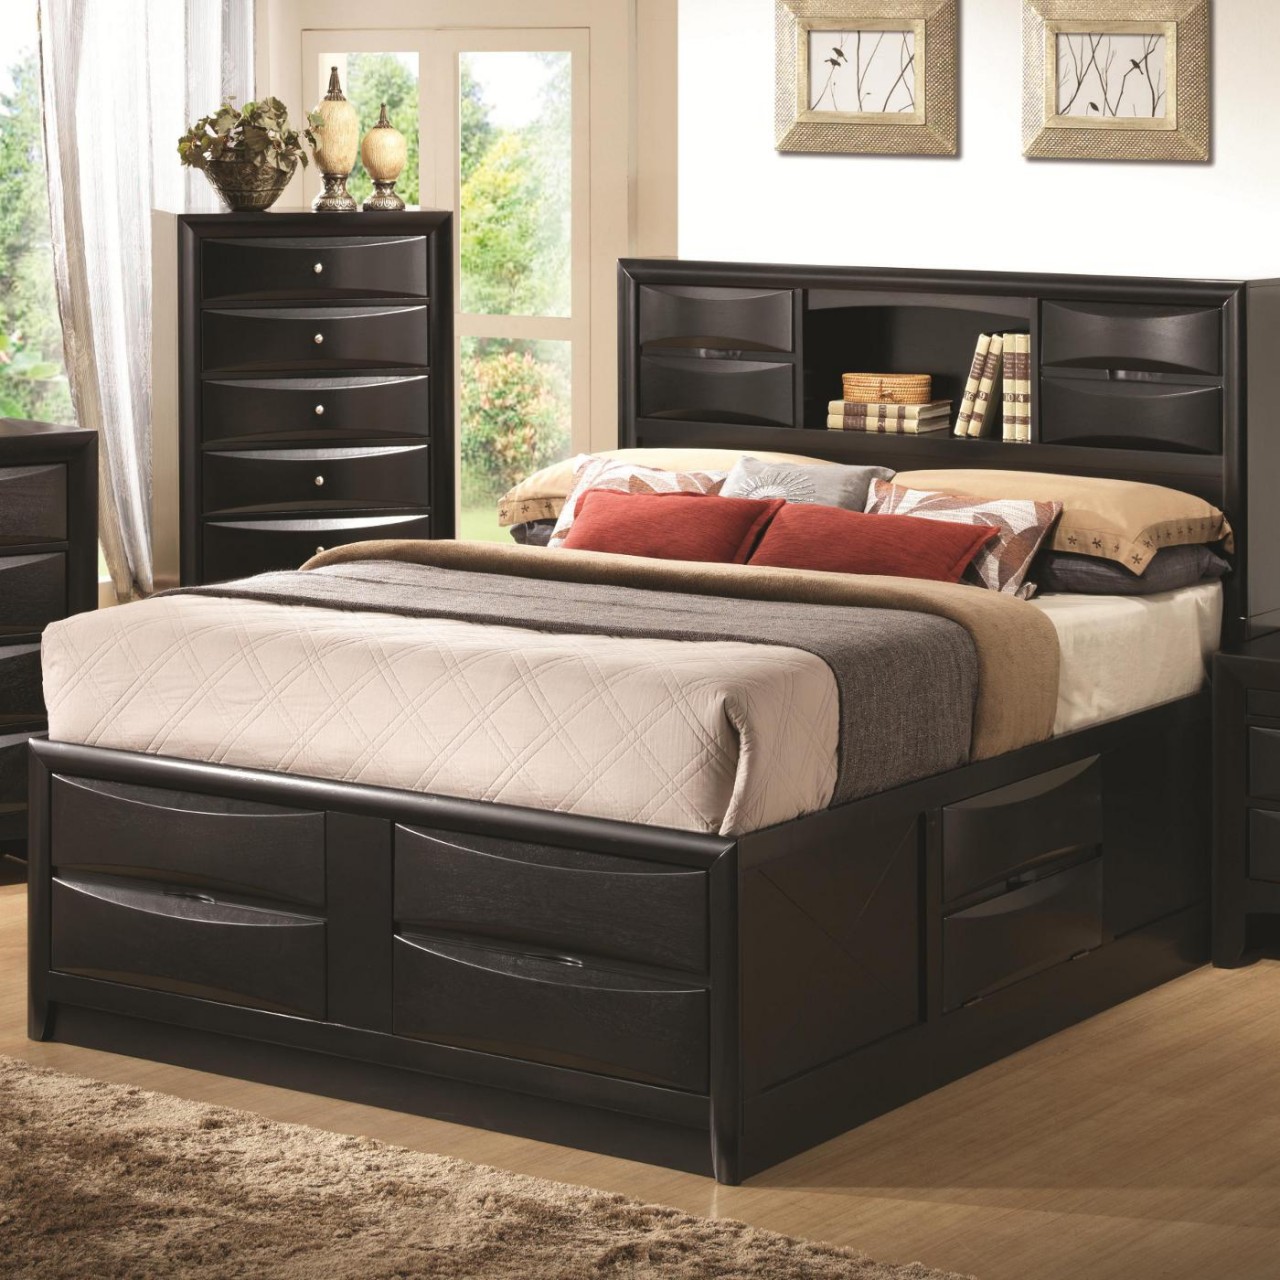 Black painted wooden bed frame with storage underneath and shelf plus a  pair of cabinets in